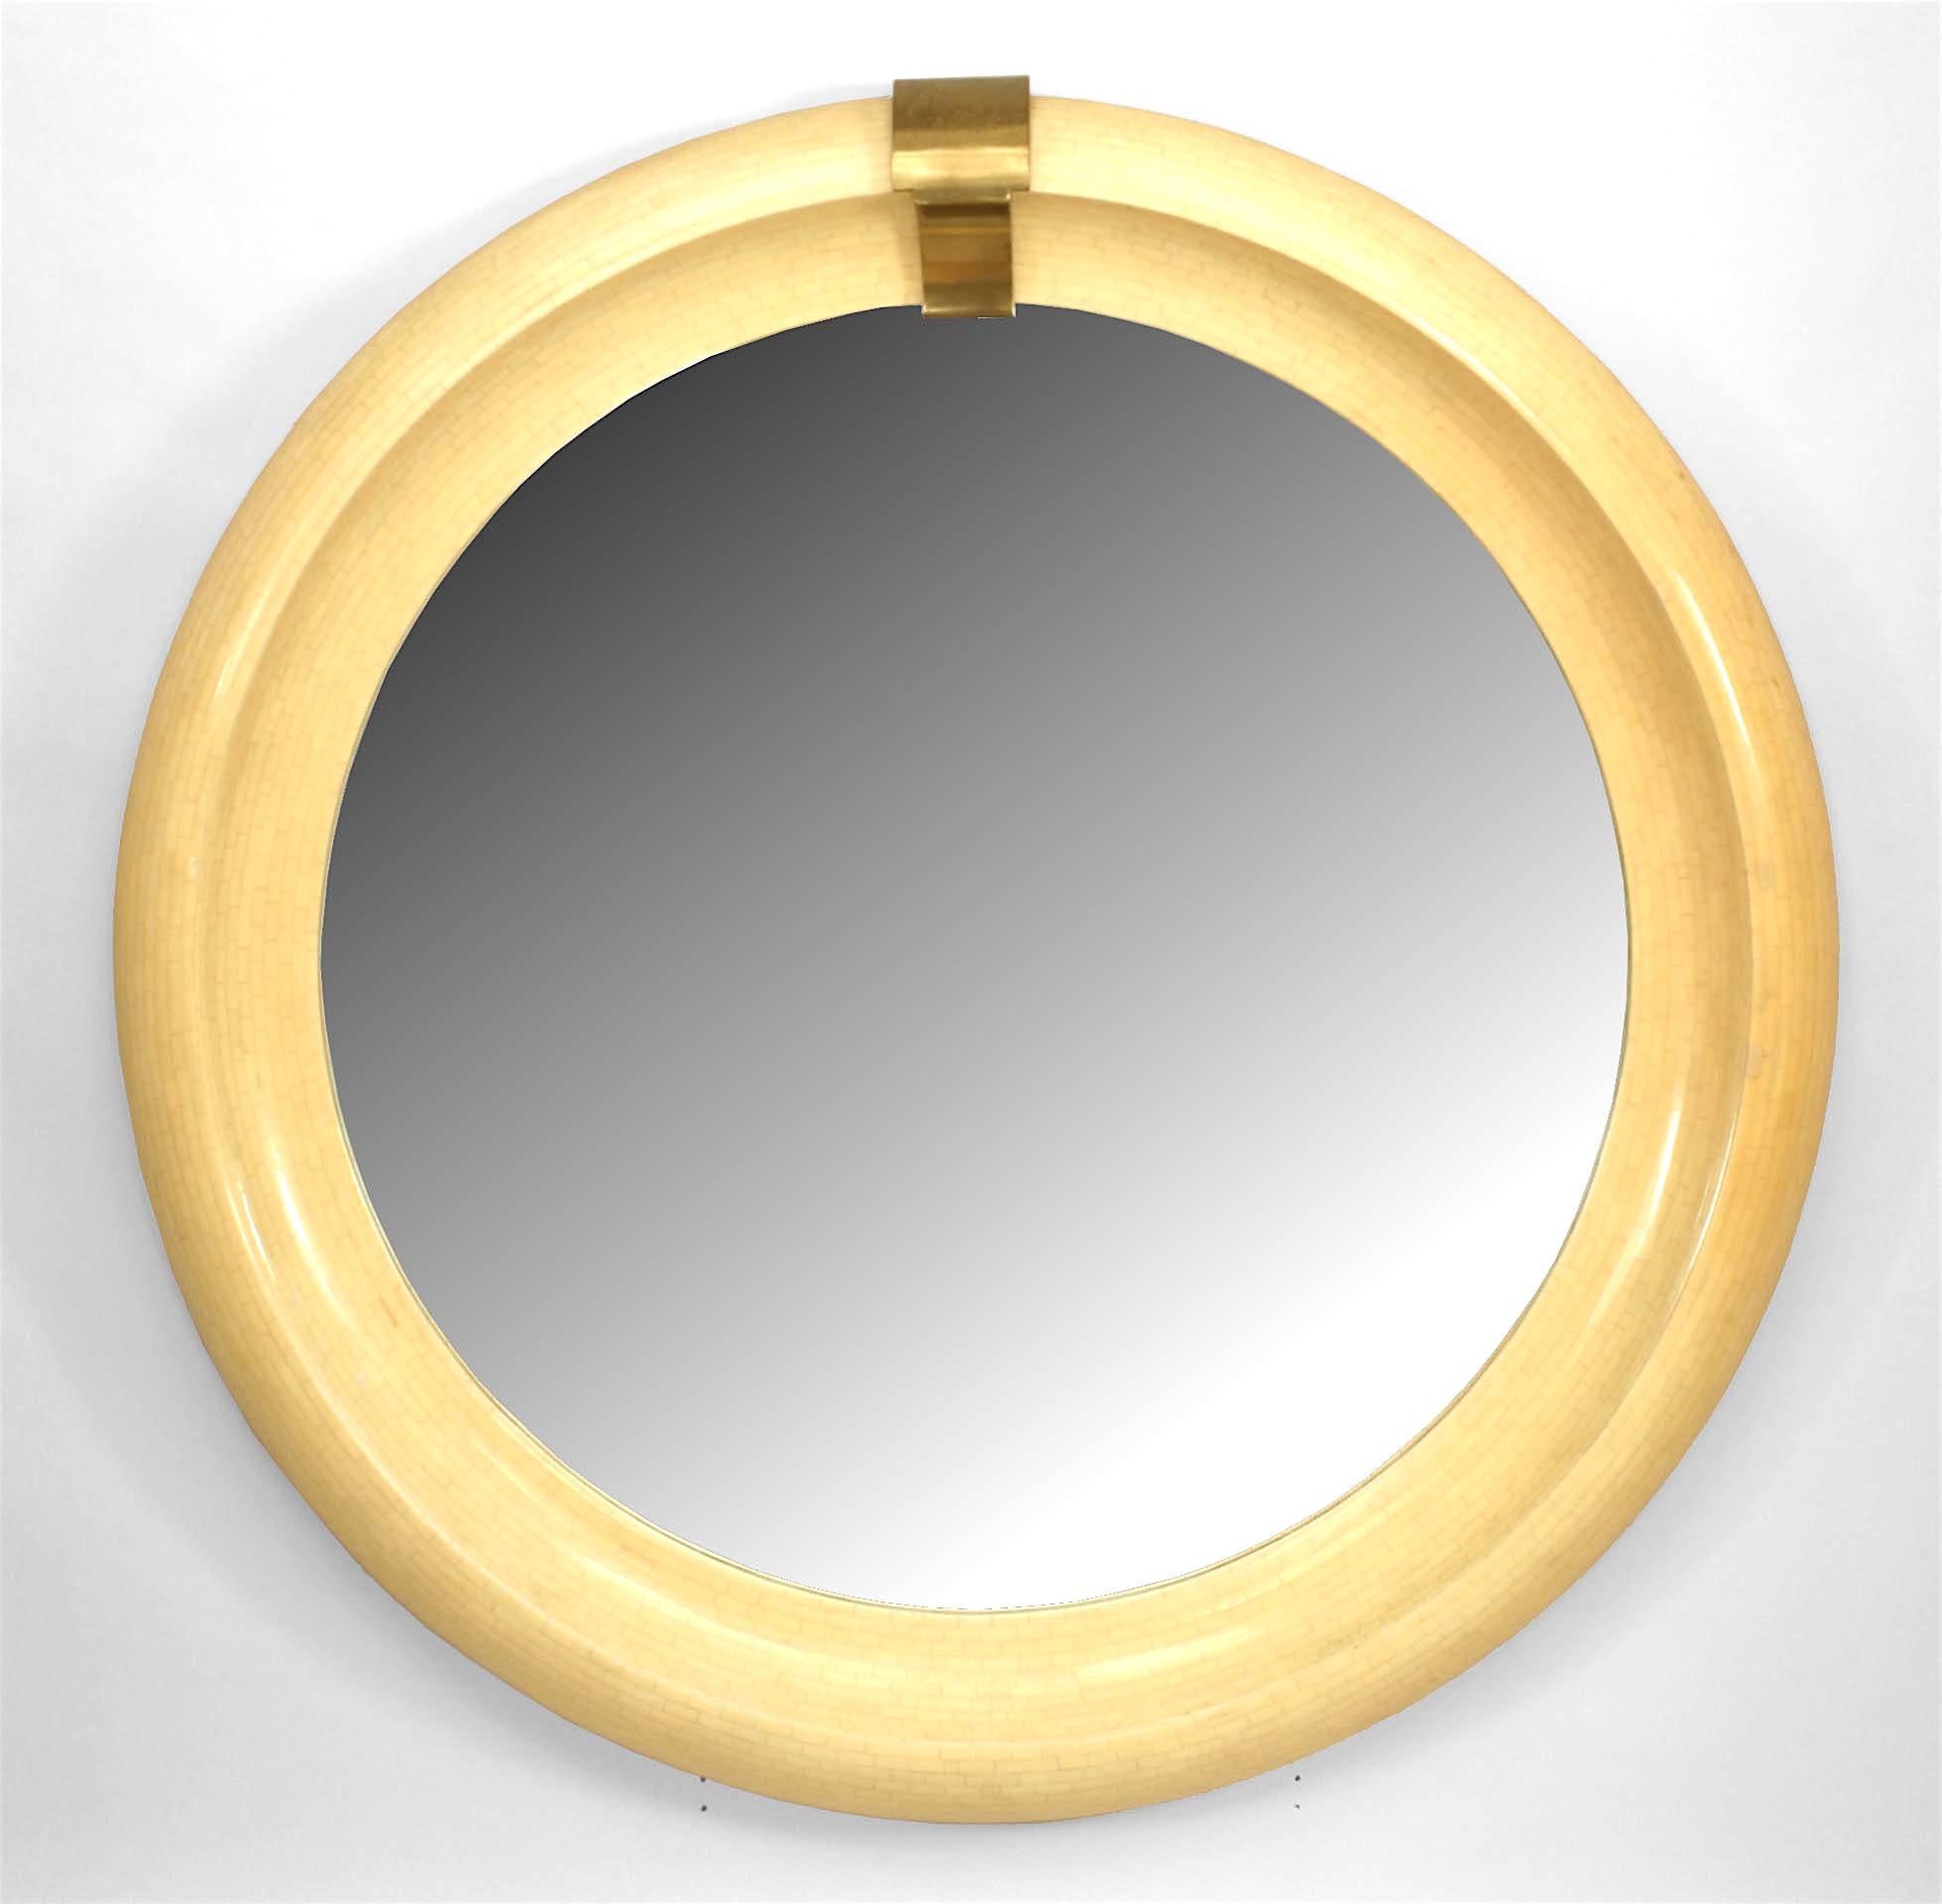 American Mid-Century Modern round mirror wall mirror with small brick design veneer and large bevelled form frame with a brass keystone top. (attributed to KARL SPRINGER)
